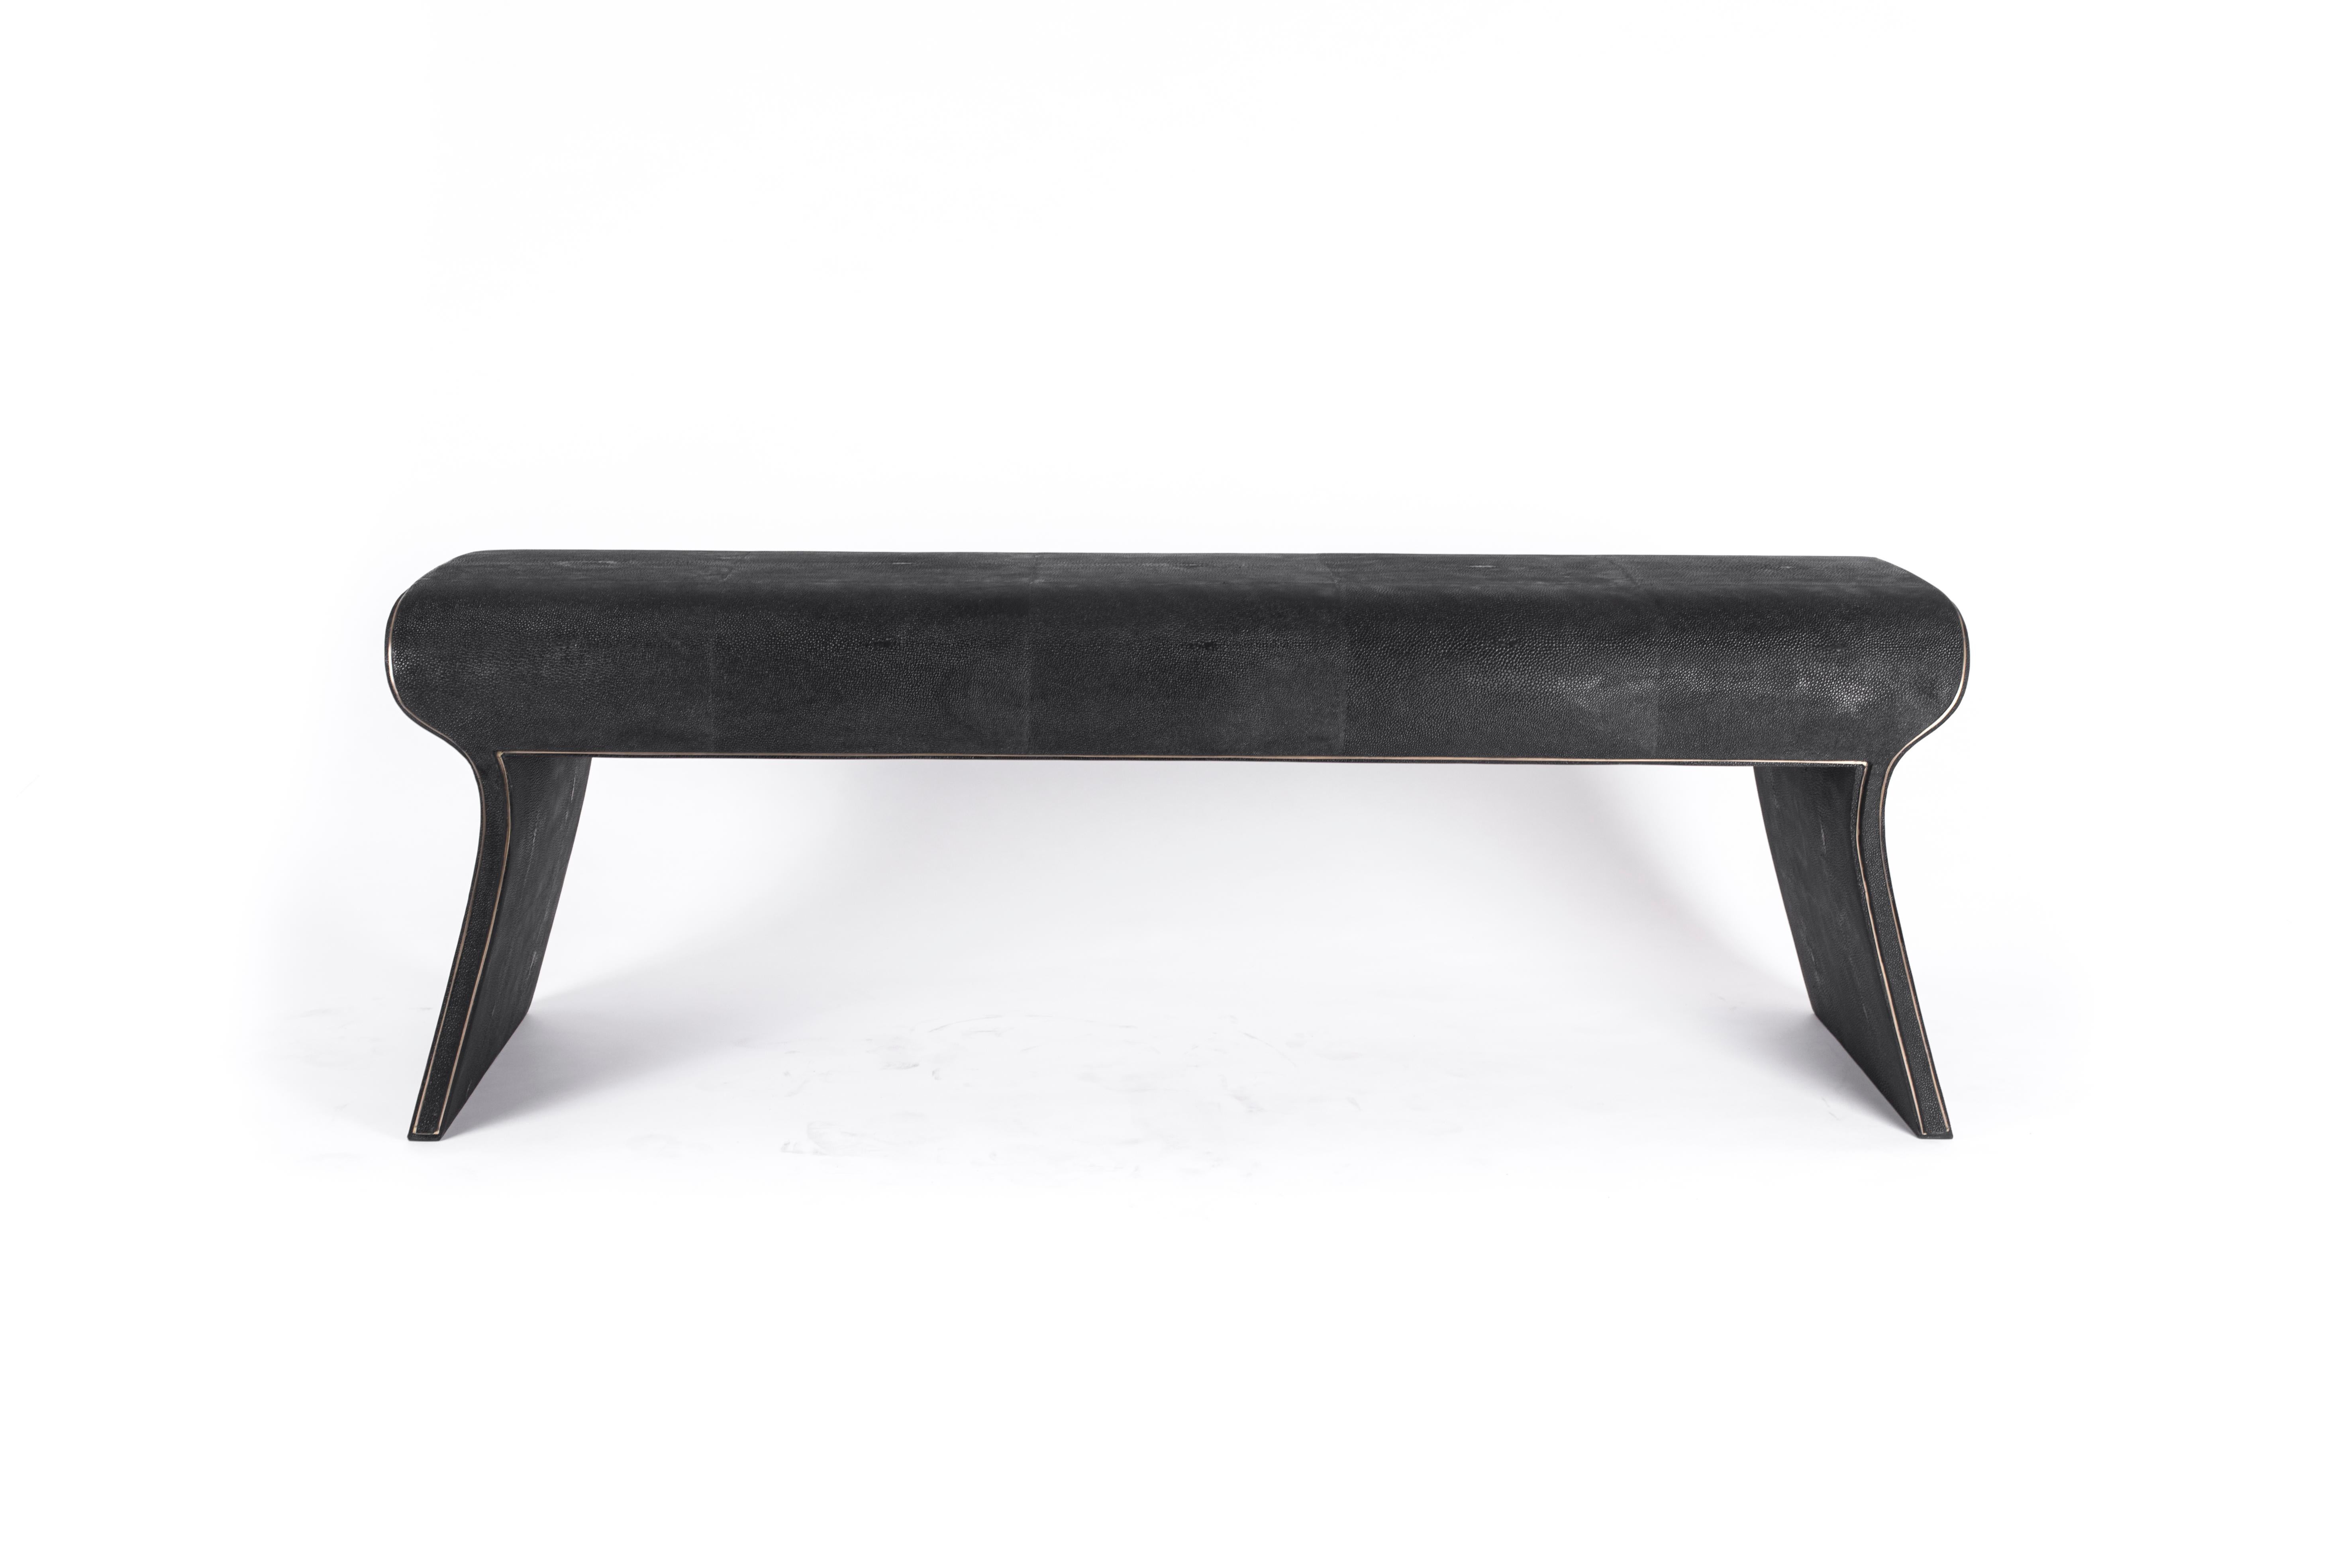 The Dandy day bench is the ultimate luxury seating. Completely covered in coal black shagreen except for a subtle metal inset frame around the bench that adds another dimension to the piece. Upholstery available on request. This piece is designed by